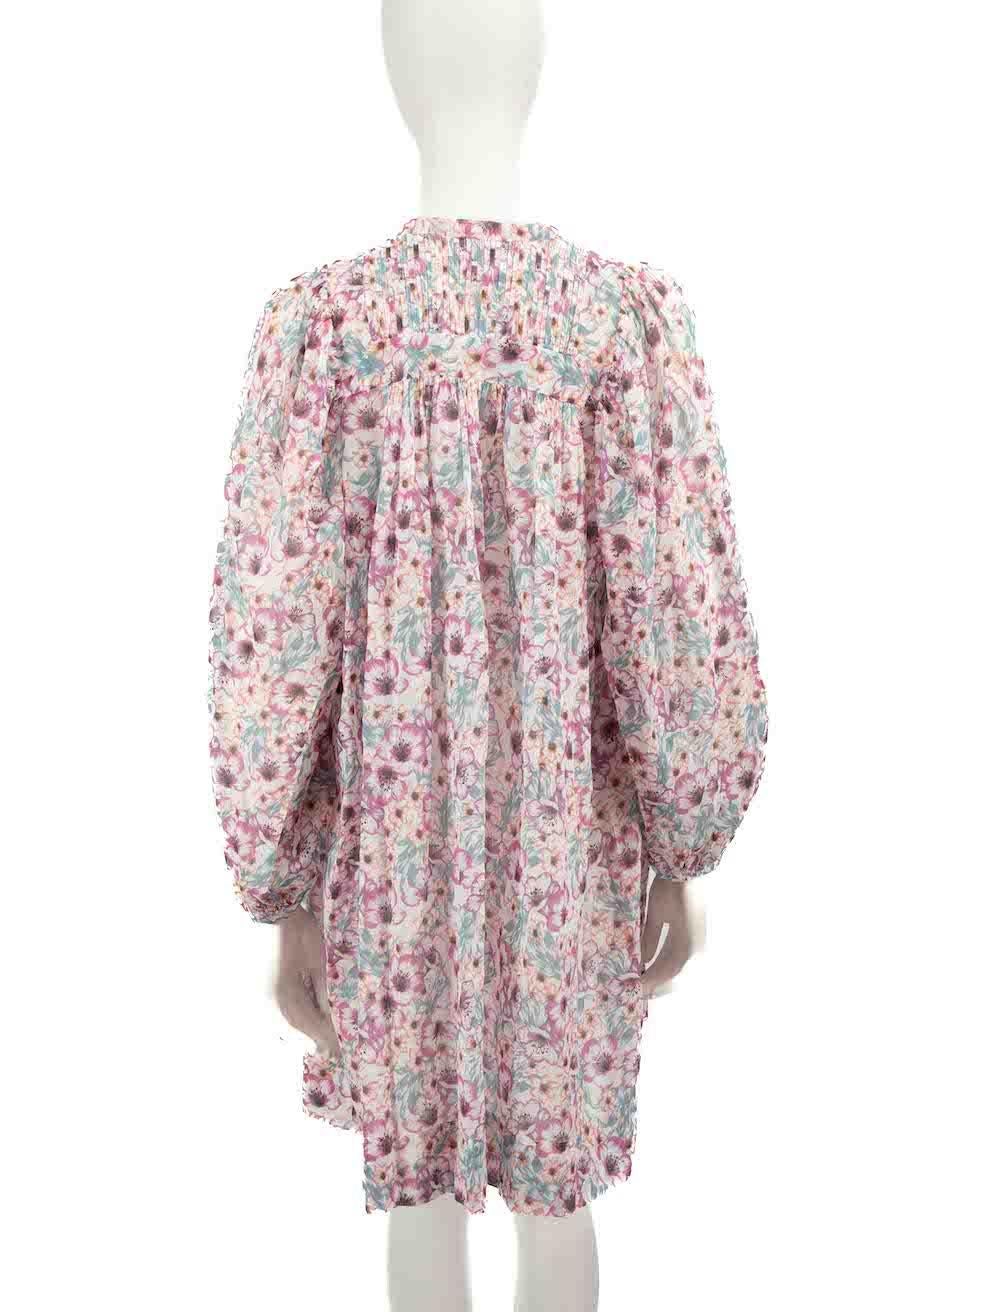 Isabel Marant Floral Print Puff Sleeves Dress Size S In Excellent Condition For Sale In London, GB